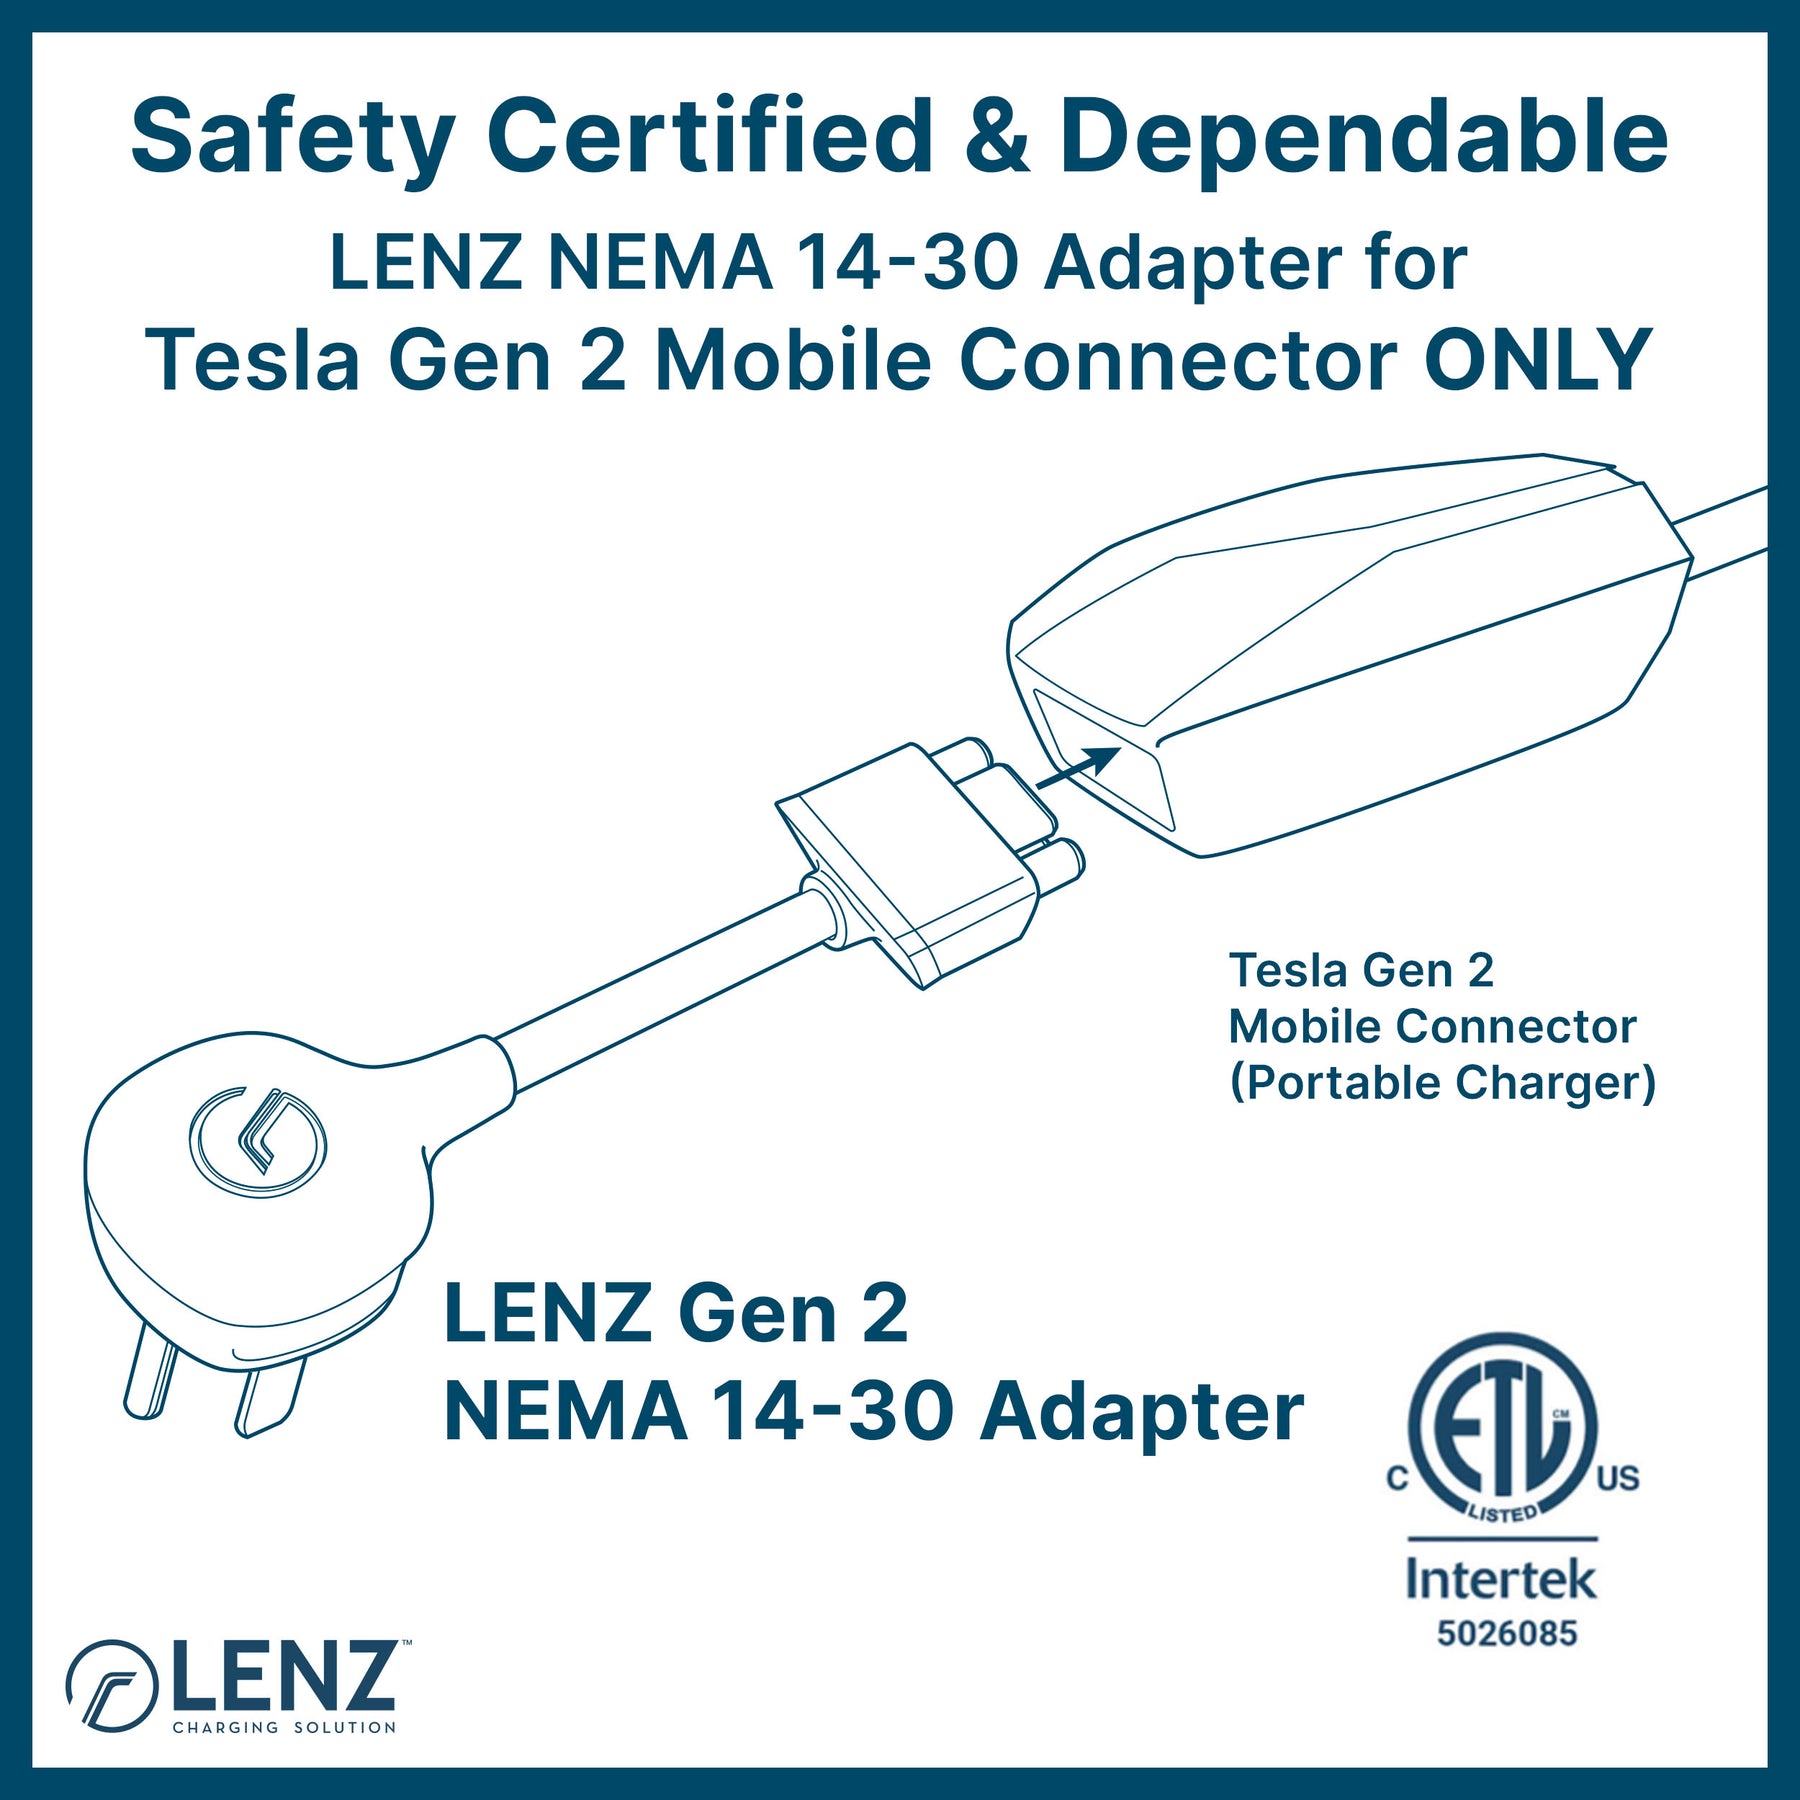 LENZ NEMA 14-30 Adapter is safety tested and certified by ETL (Intertek 5026085) and compatible with Tesla Gen 2 Mobile Connector ONLY